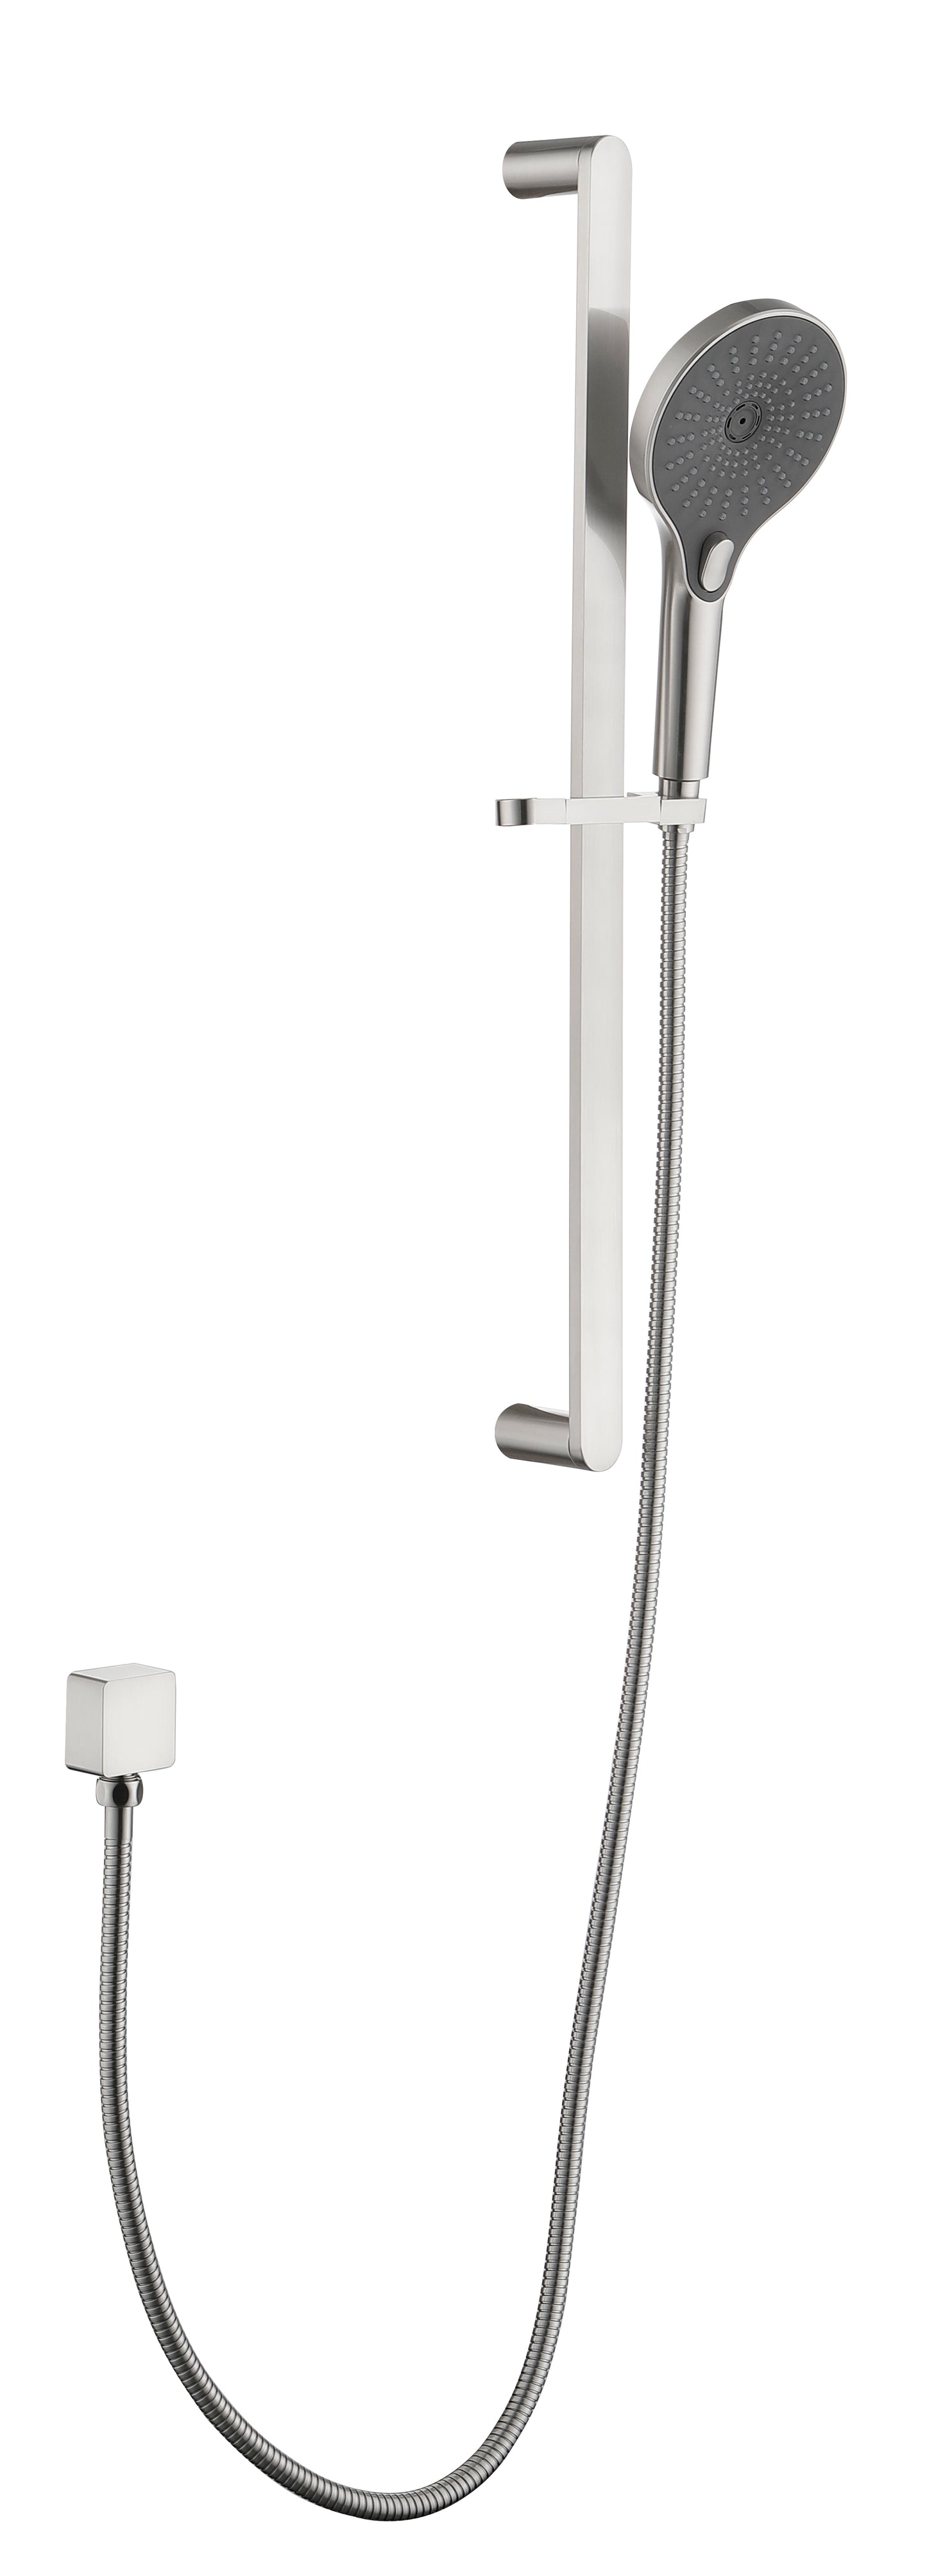 SH-Love-W1272: SHOWERS Stainless Steel Slide Bar Grab Rail Includes Handheld Shower Head and 69-Inch Hose